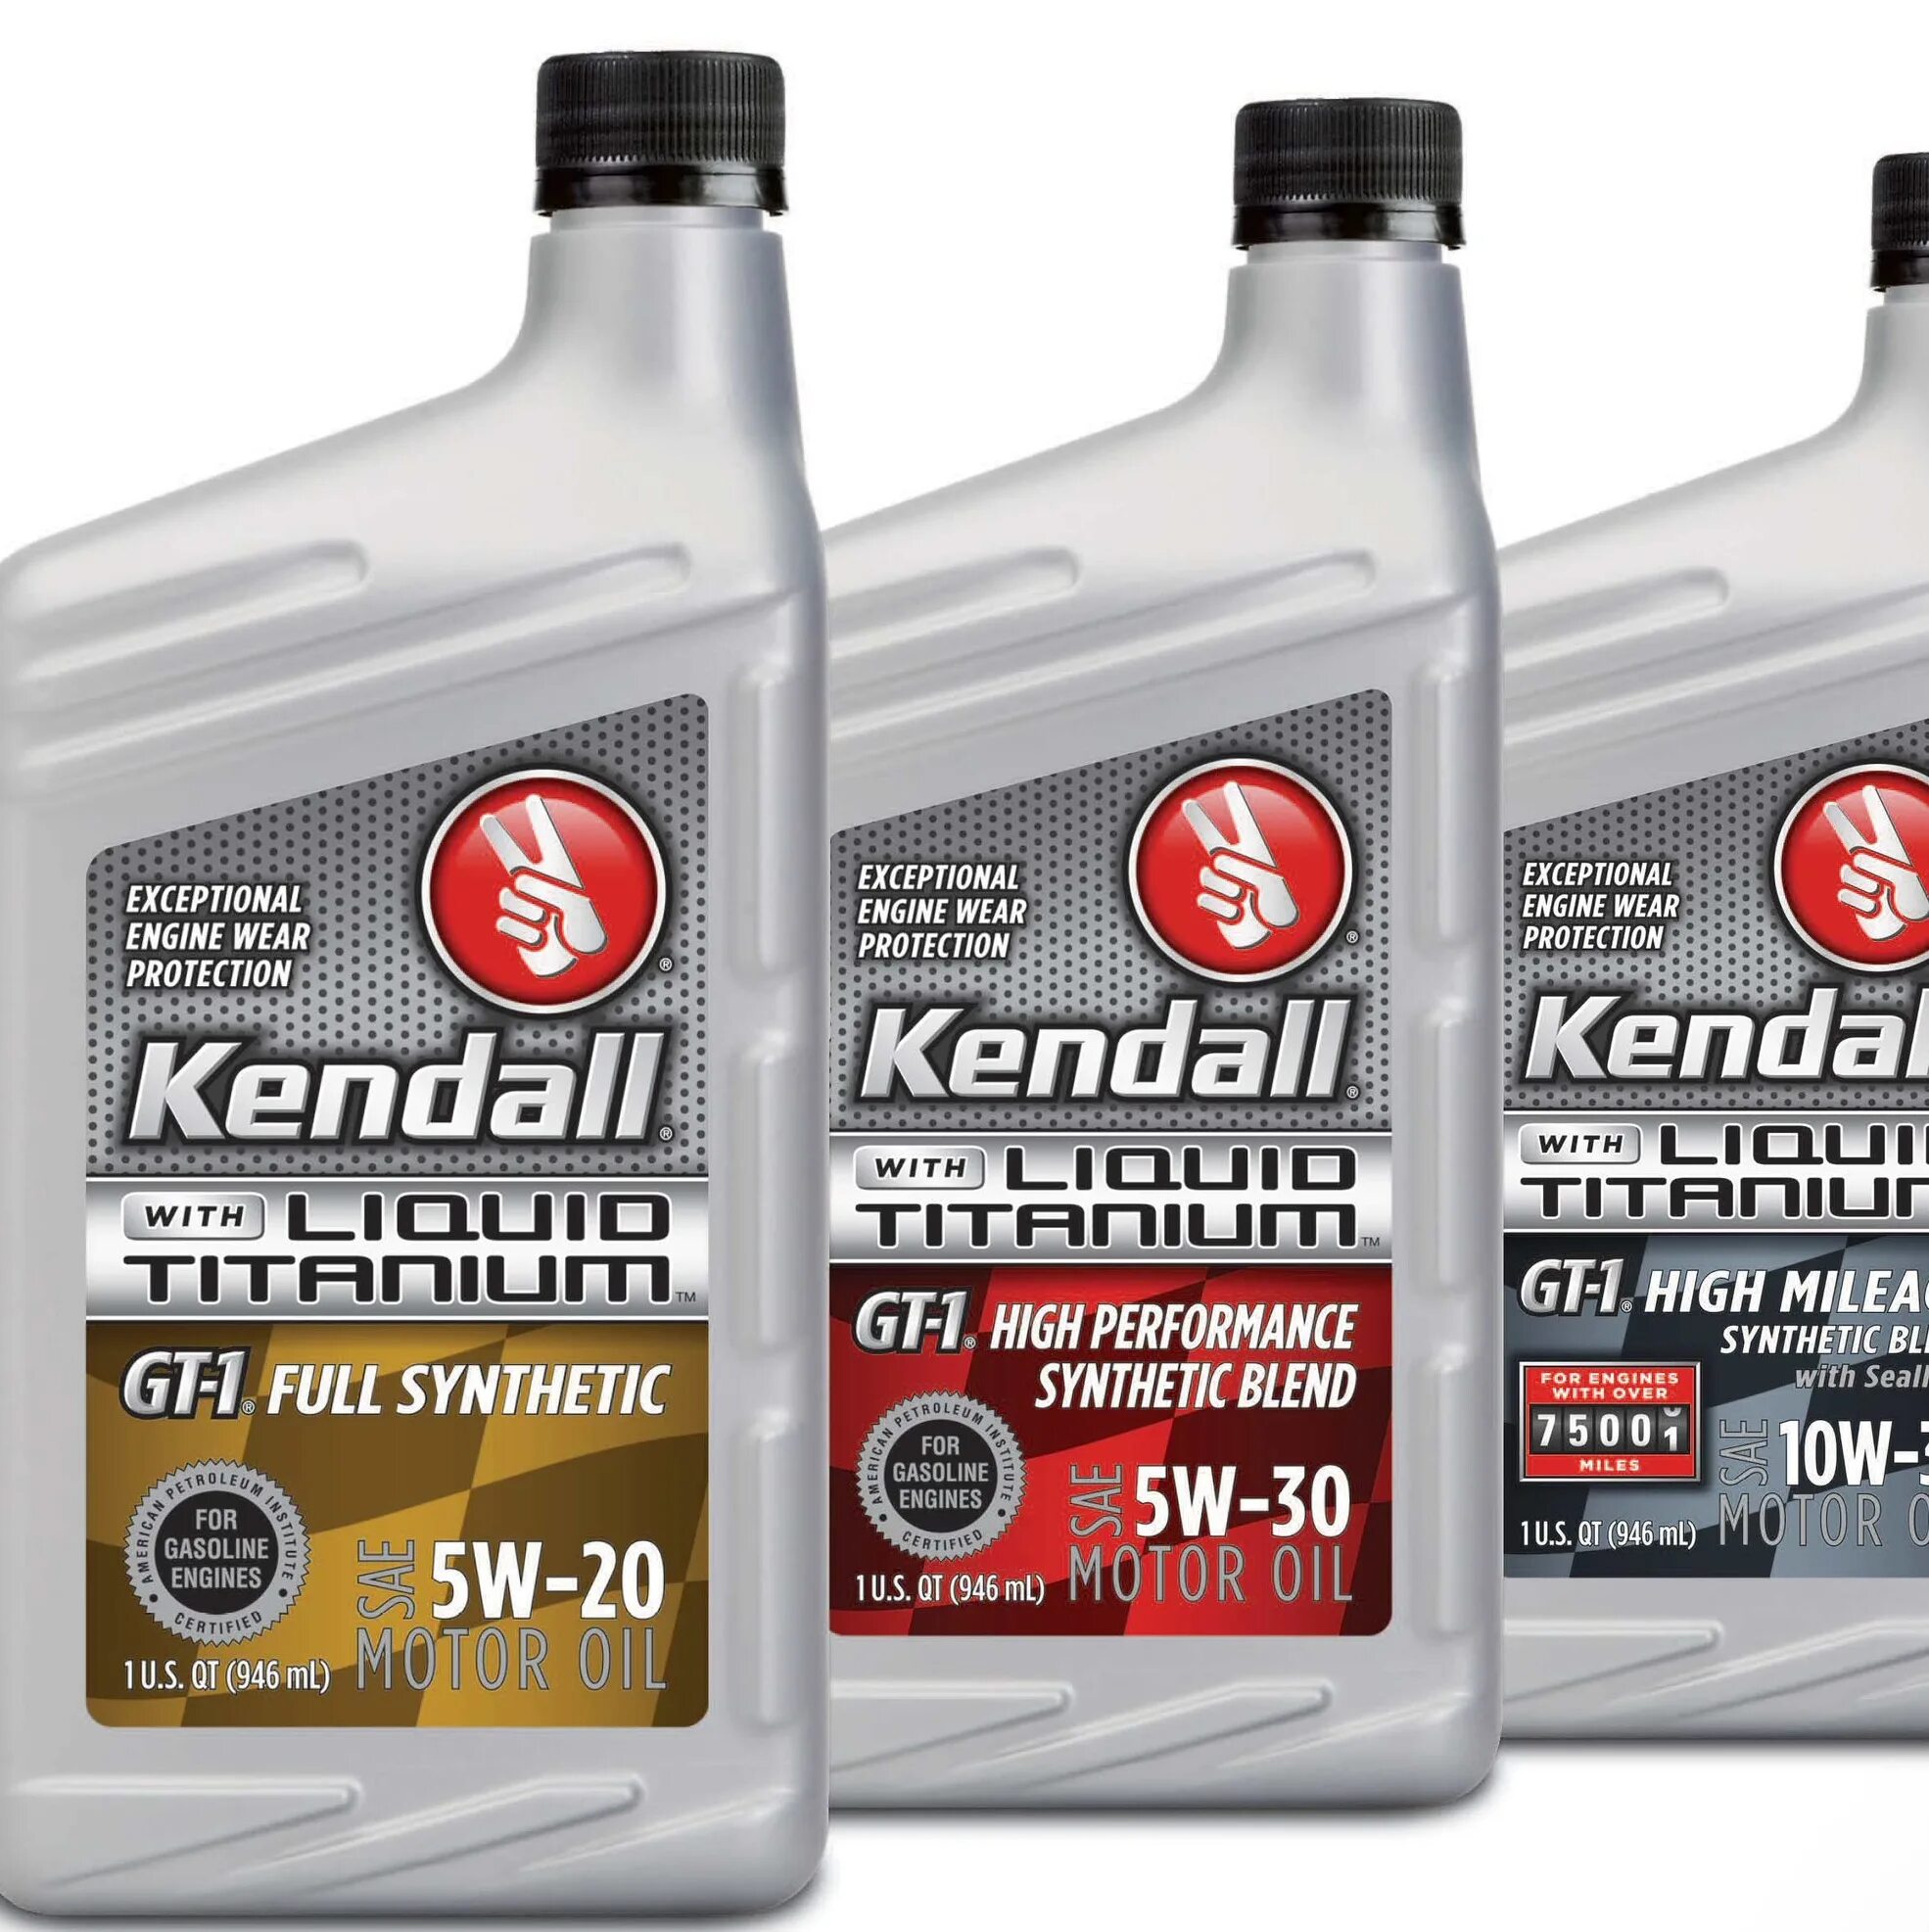 Моторное масло Kendall gt-1 5w30. Kendall gt-1 5w-20 High Performance Synthetic Blend Motor Oil with Liquid Titanium. Kendall gt-1 High Performance Synthetic Blend Liquid Titanium 5w-30. Масло Kendall 0w20 gt1. Масло моторное 5w30 clean